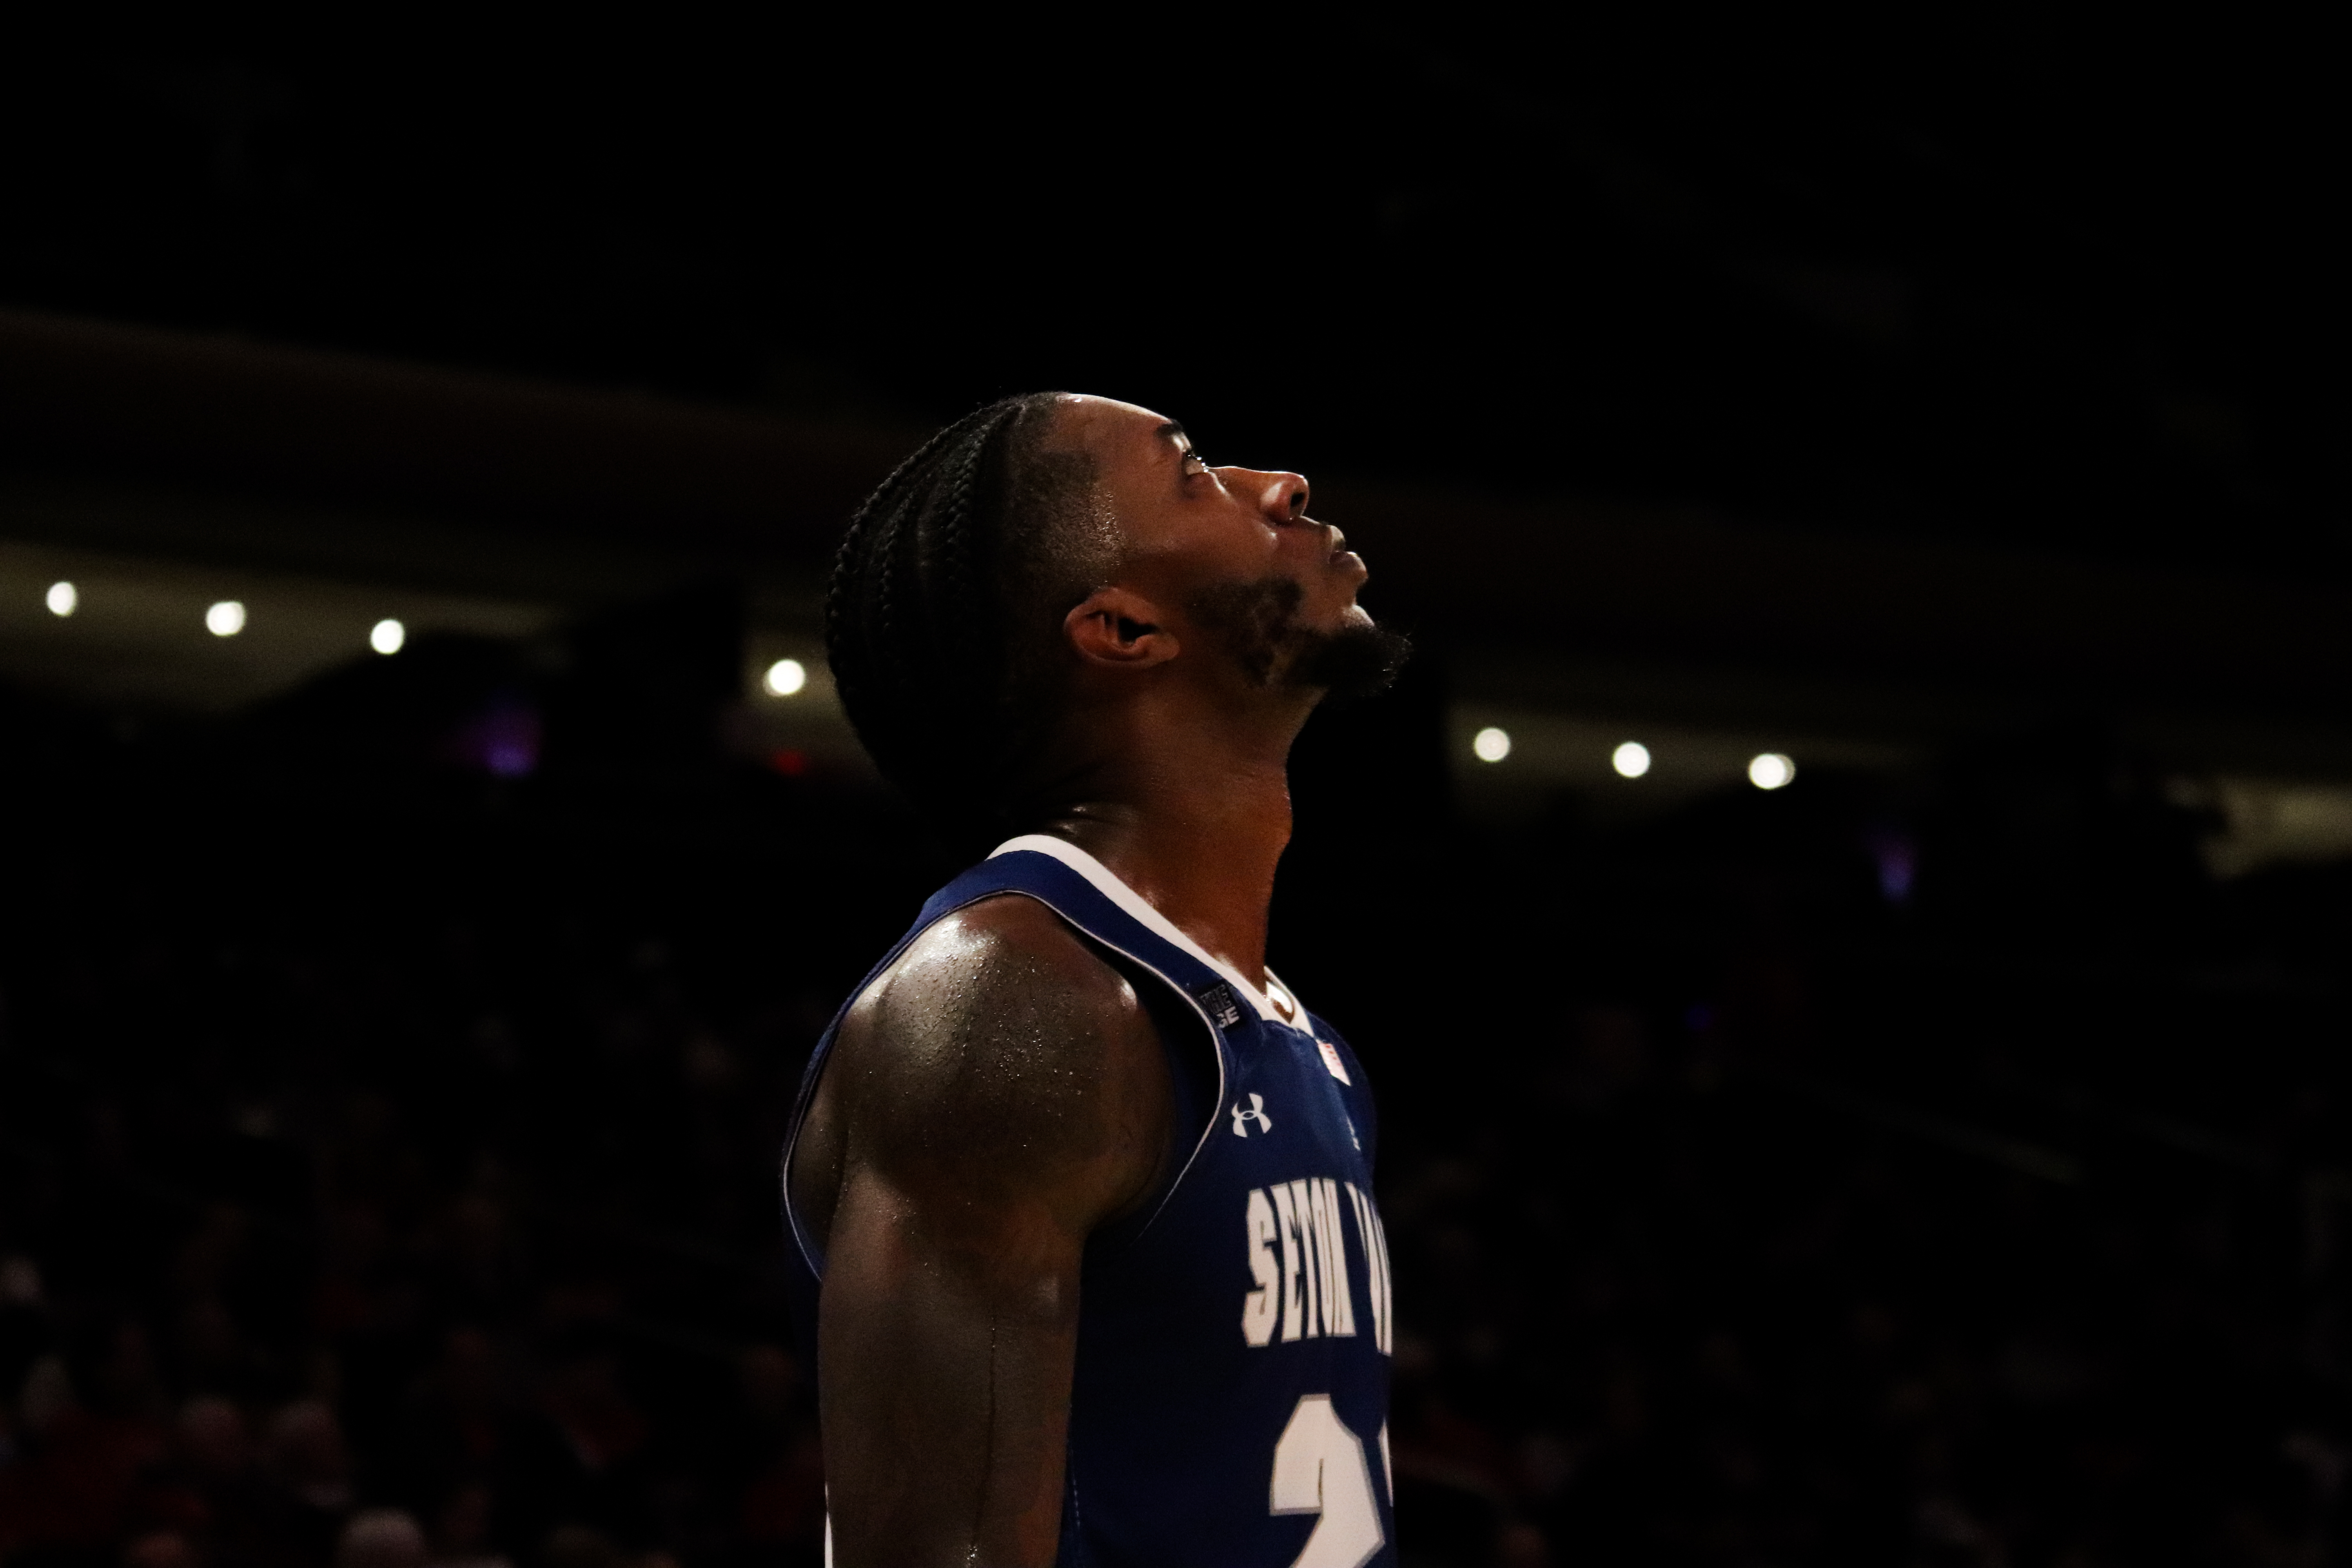 Seton Hall's Myles Cale looks at the scoreboard during an away game at Madison Square Garden vs. St. John's.